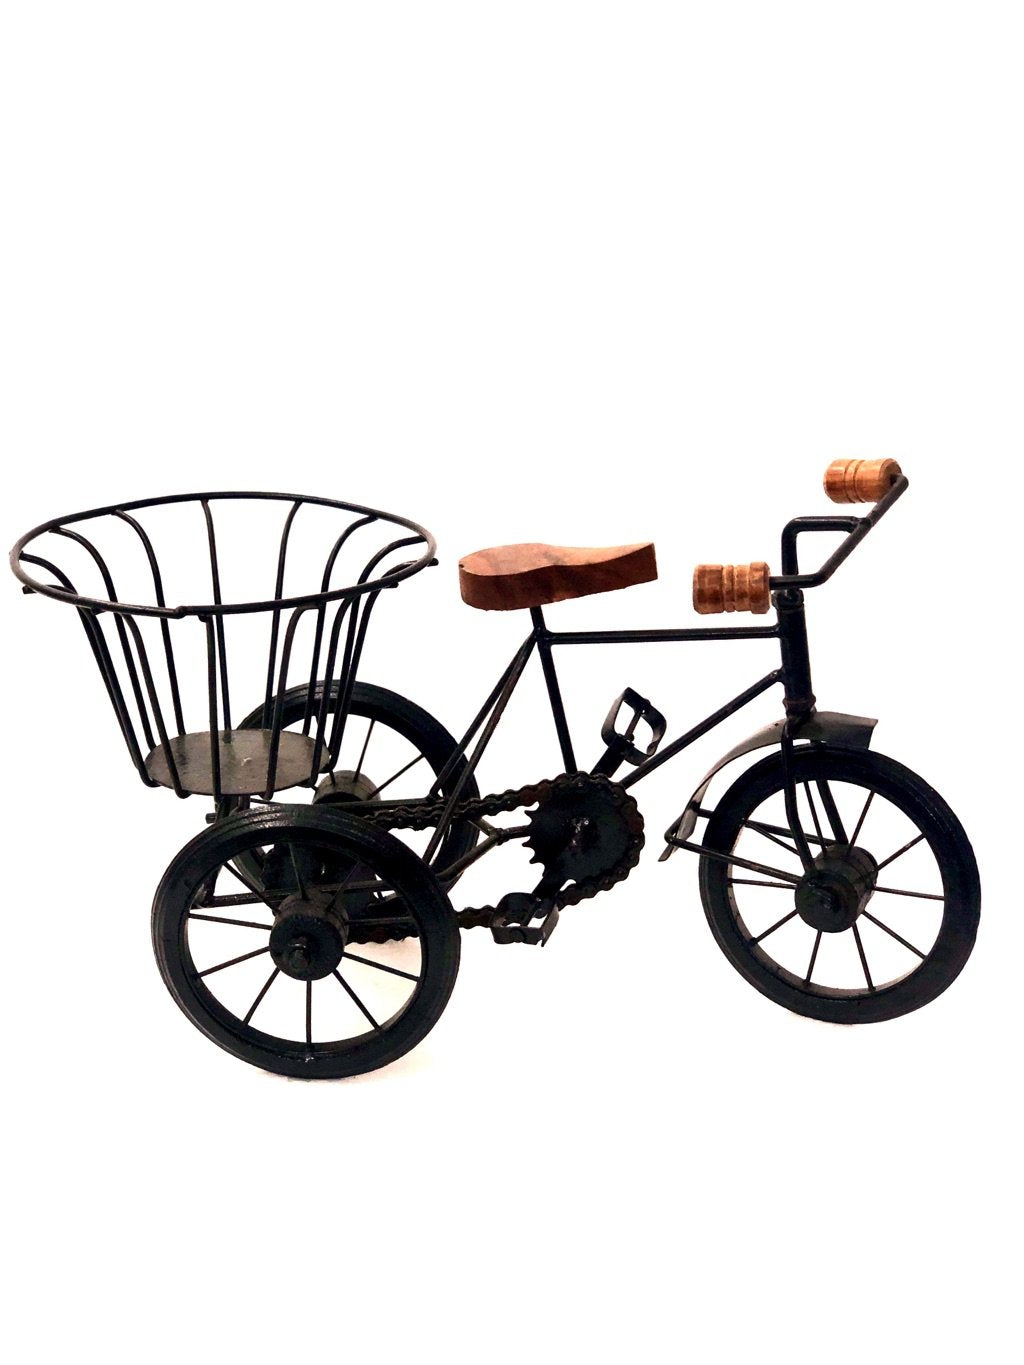 Cycle With Basket For Decoration Best Metal Vintage Art By Tamrapatra